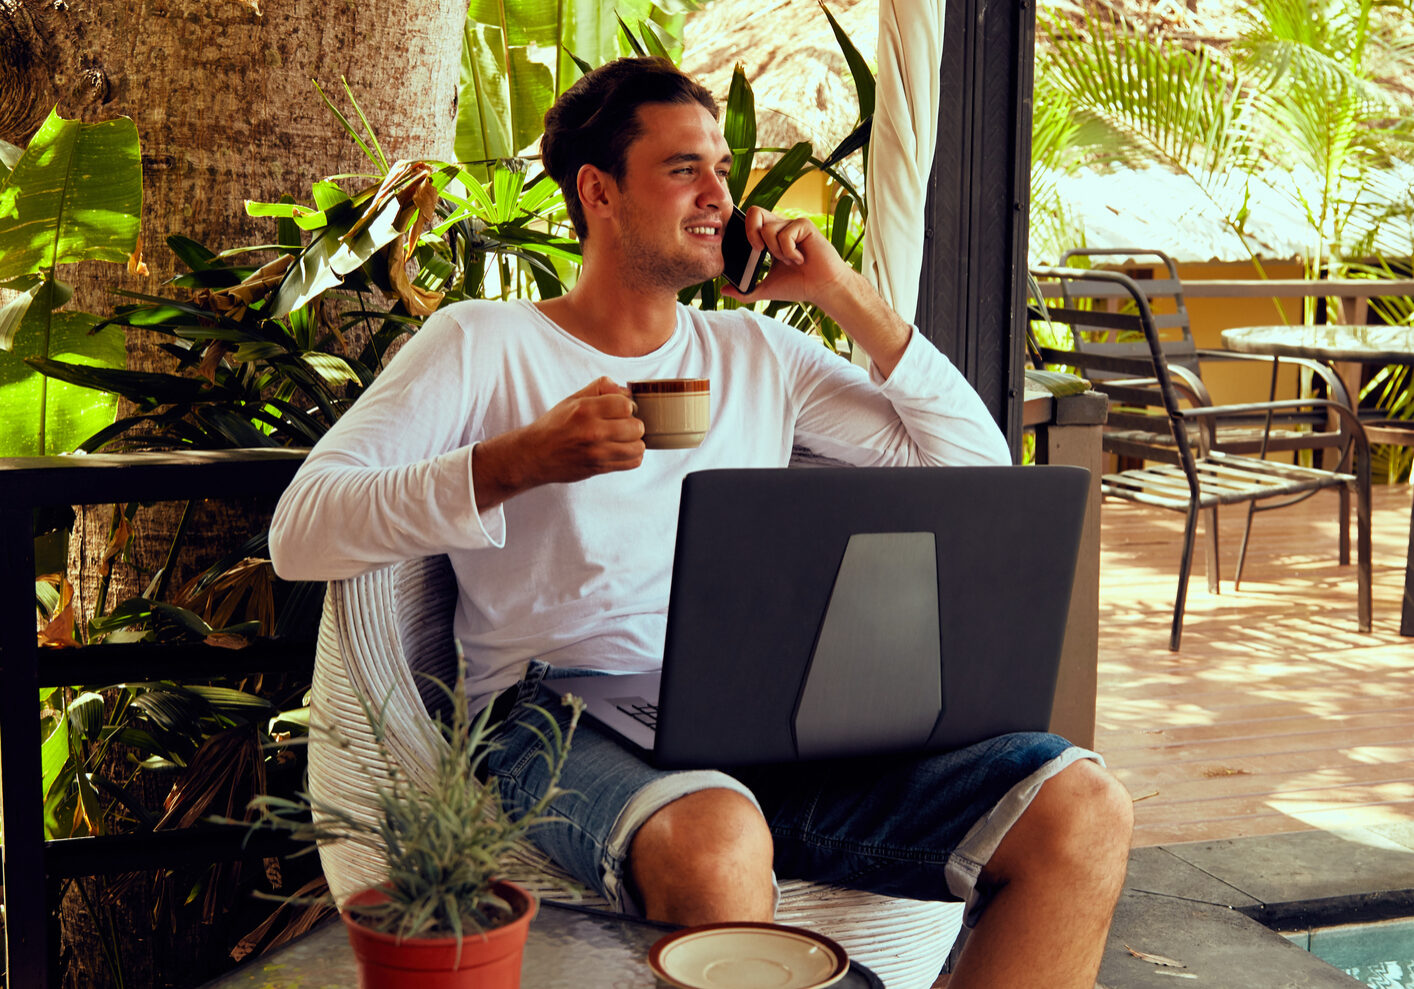 Man using cellphone while working on laptop outdoors.